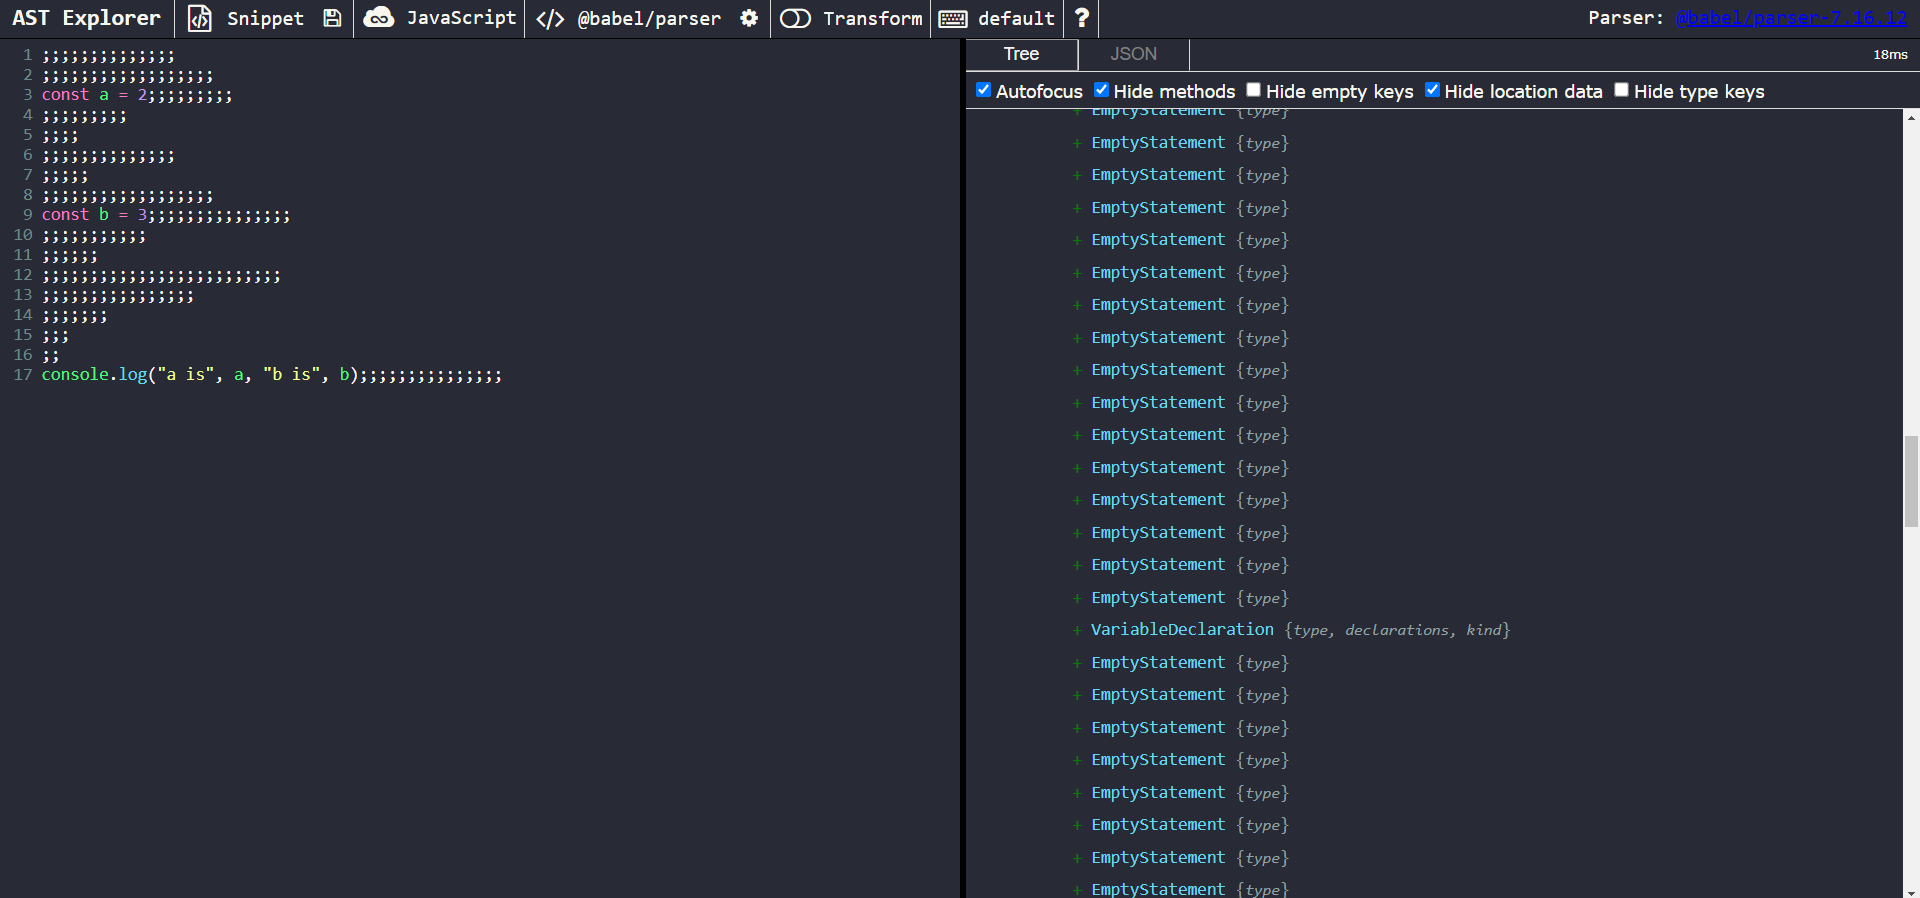 A view of the obfuscated code in AST Explorer